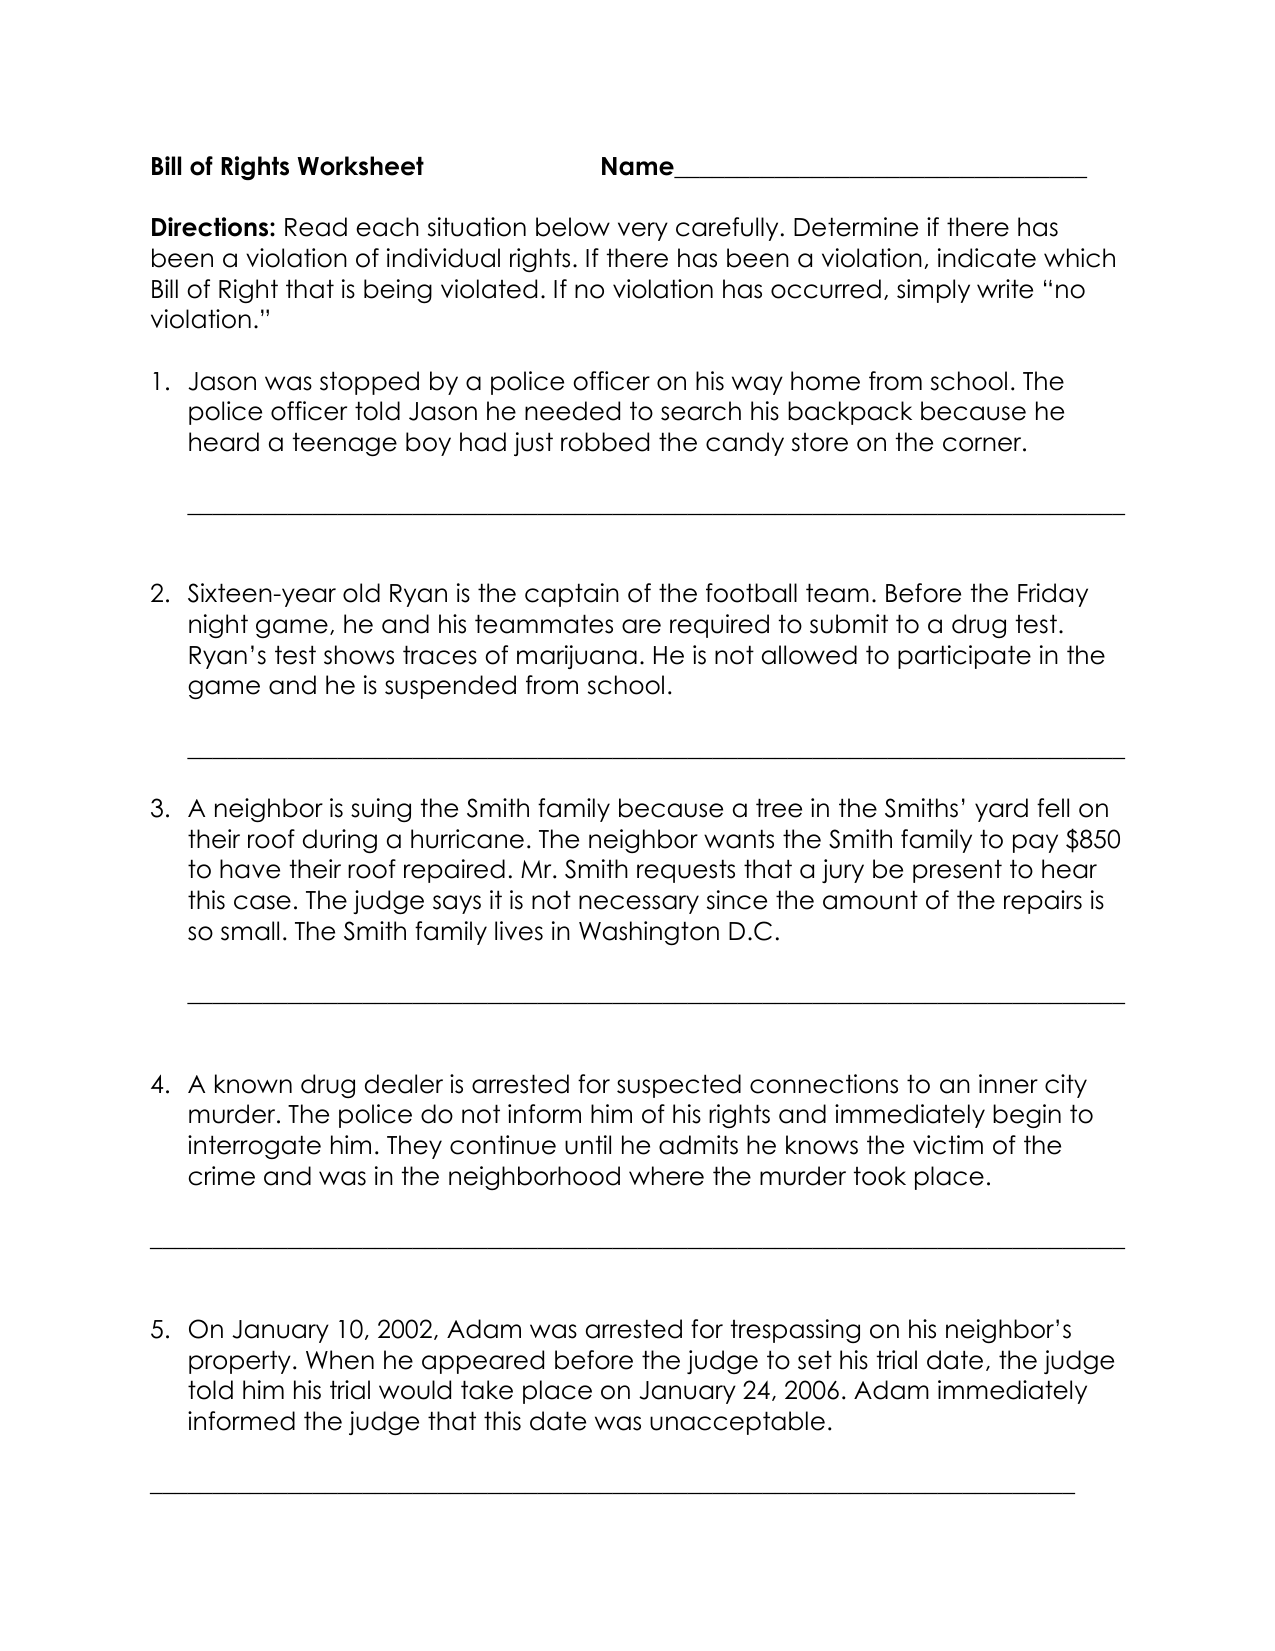 The Bill Of Rights Scenarios - Community Unit School District 20 Intended For Bill Of Rights Worksheet Answers